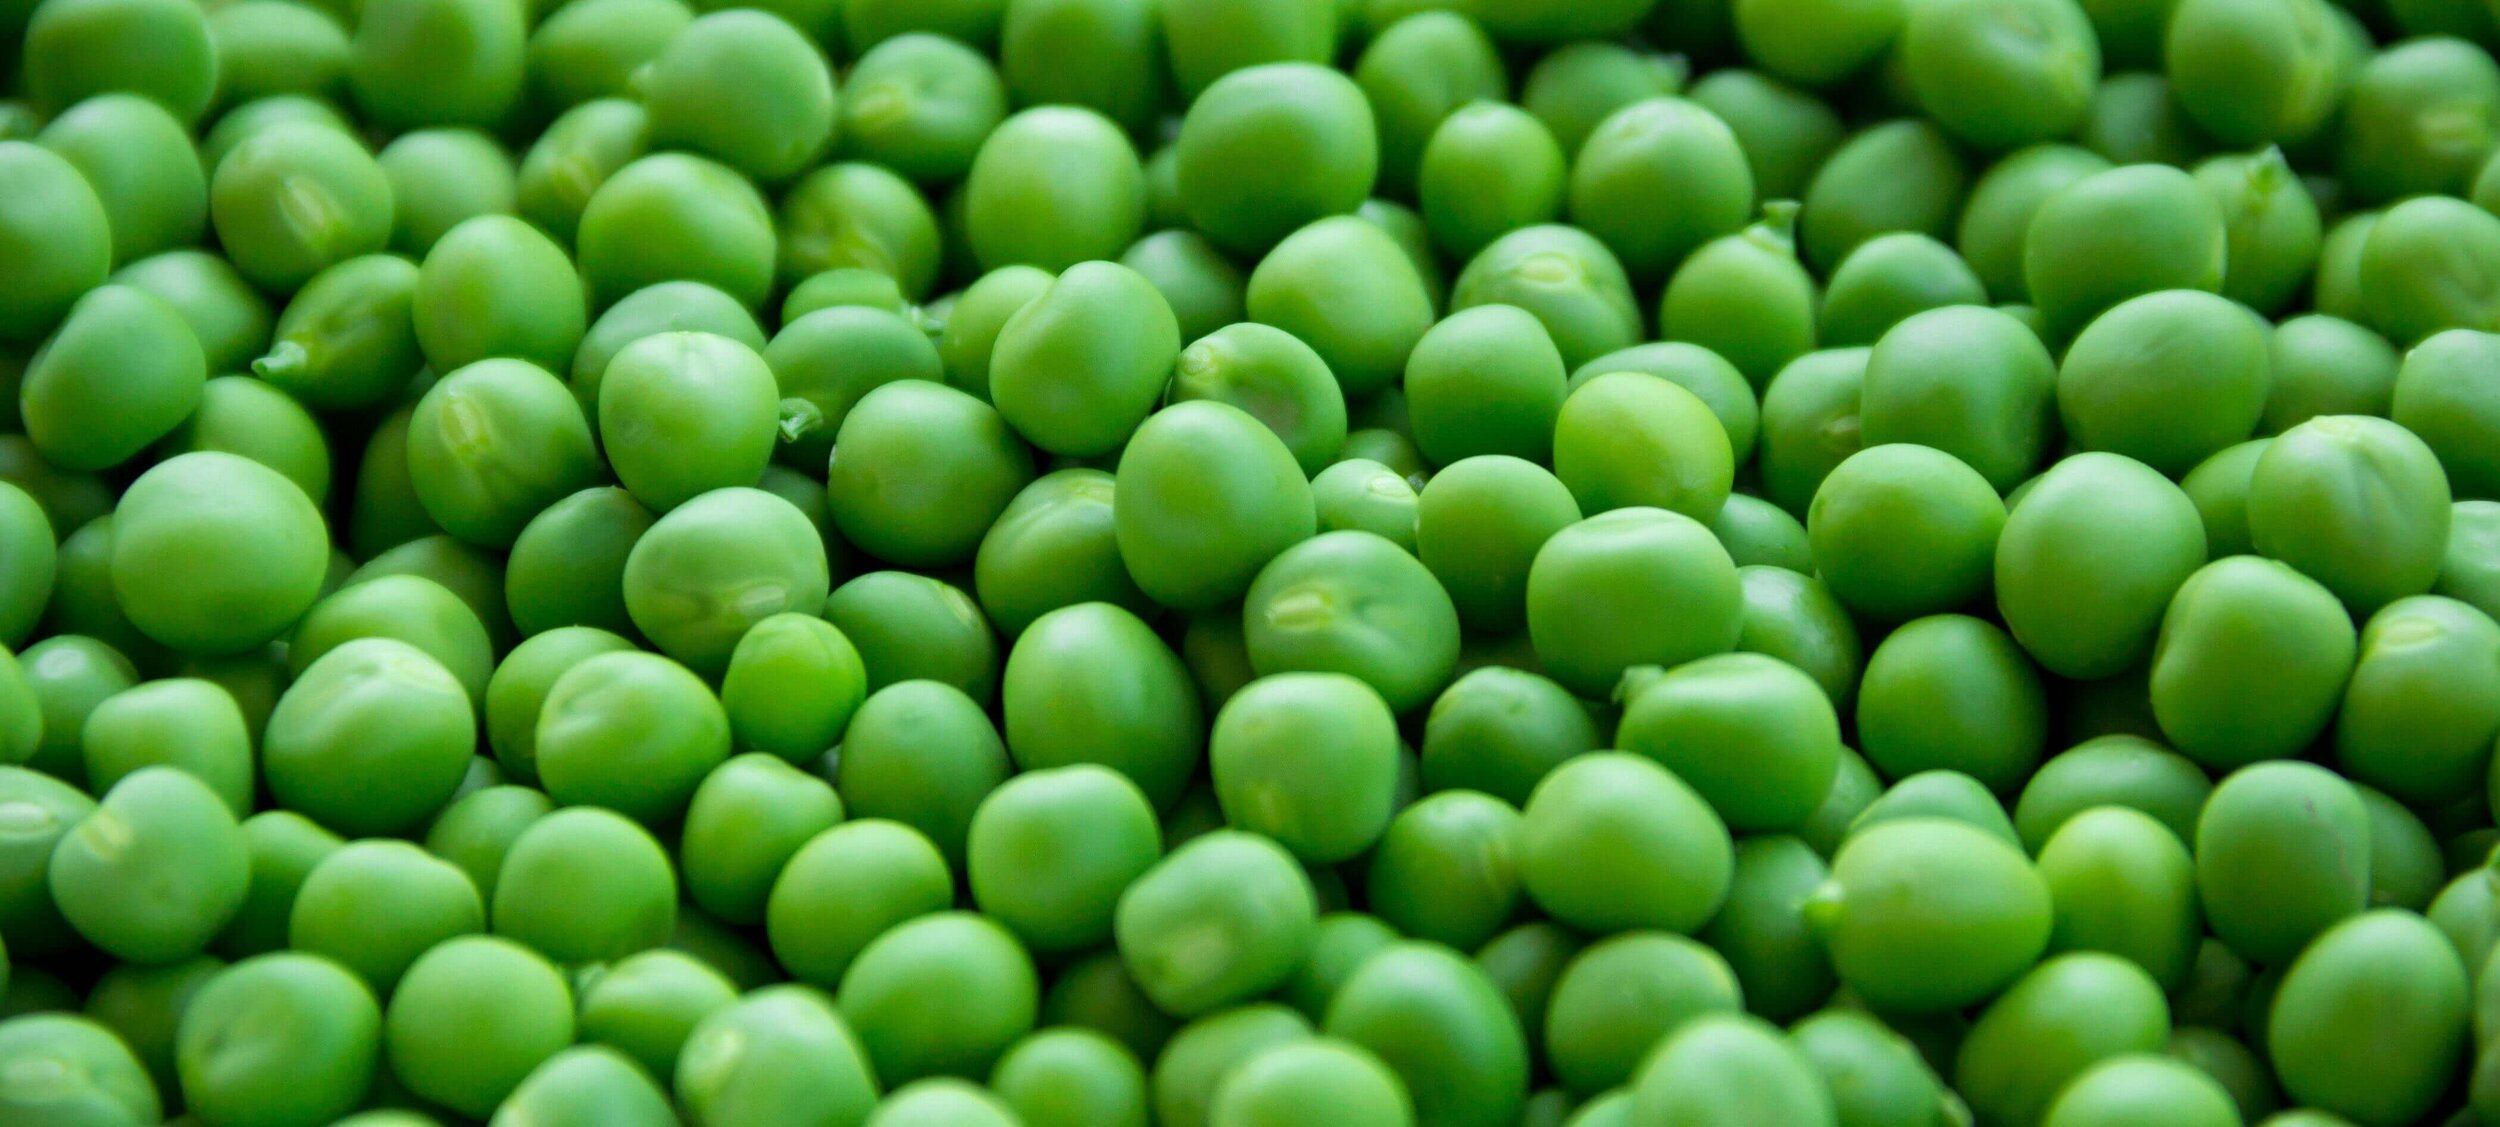 Healthy and Organic Green Peas